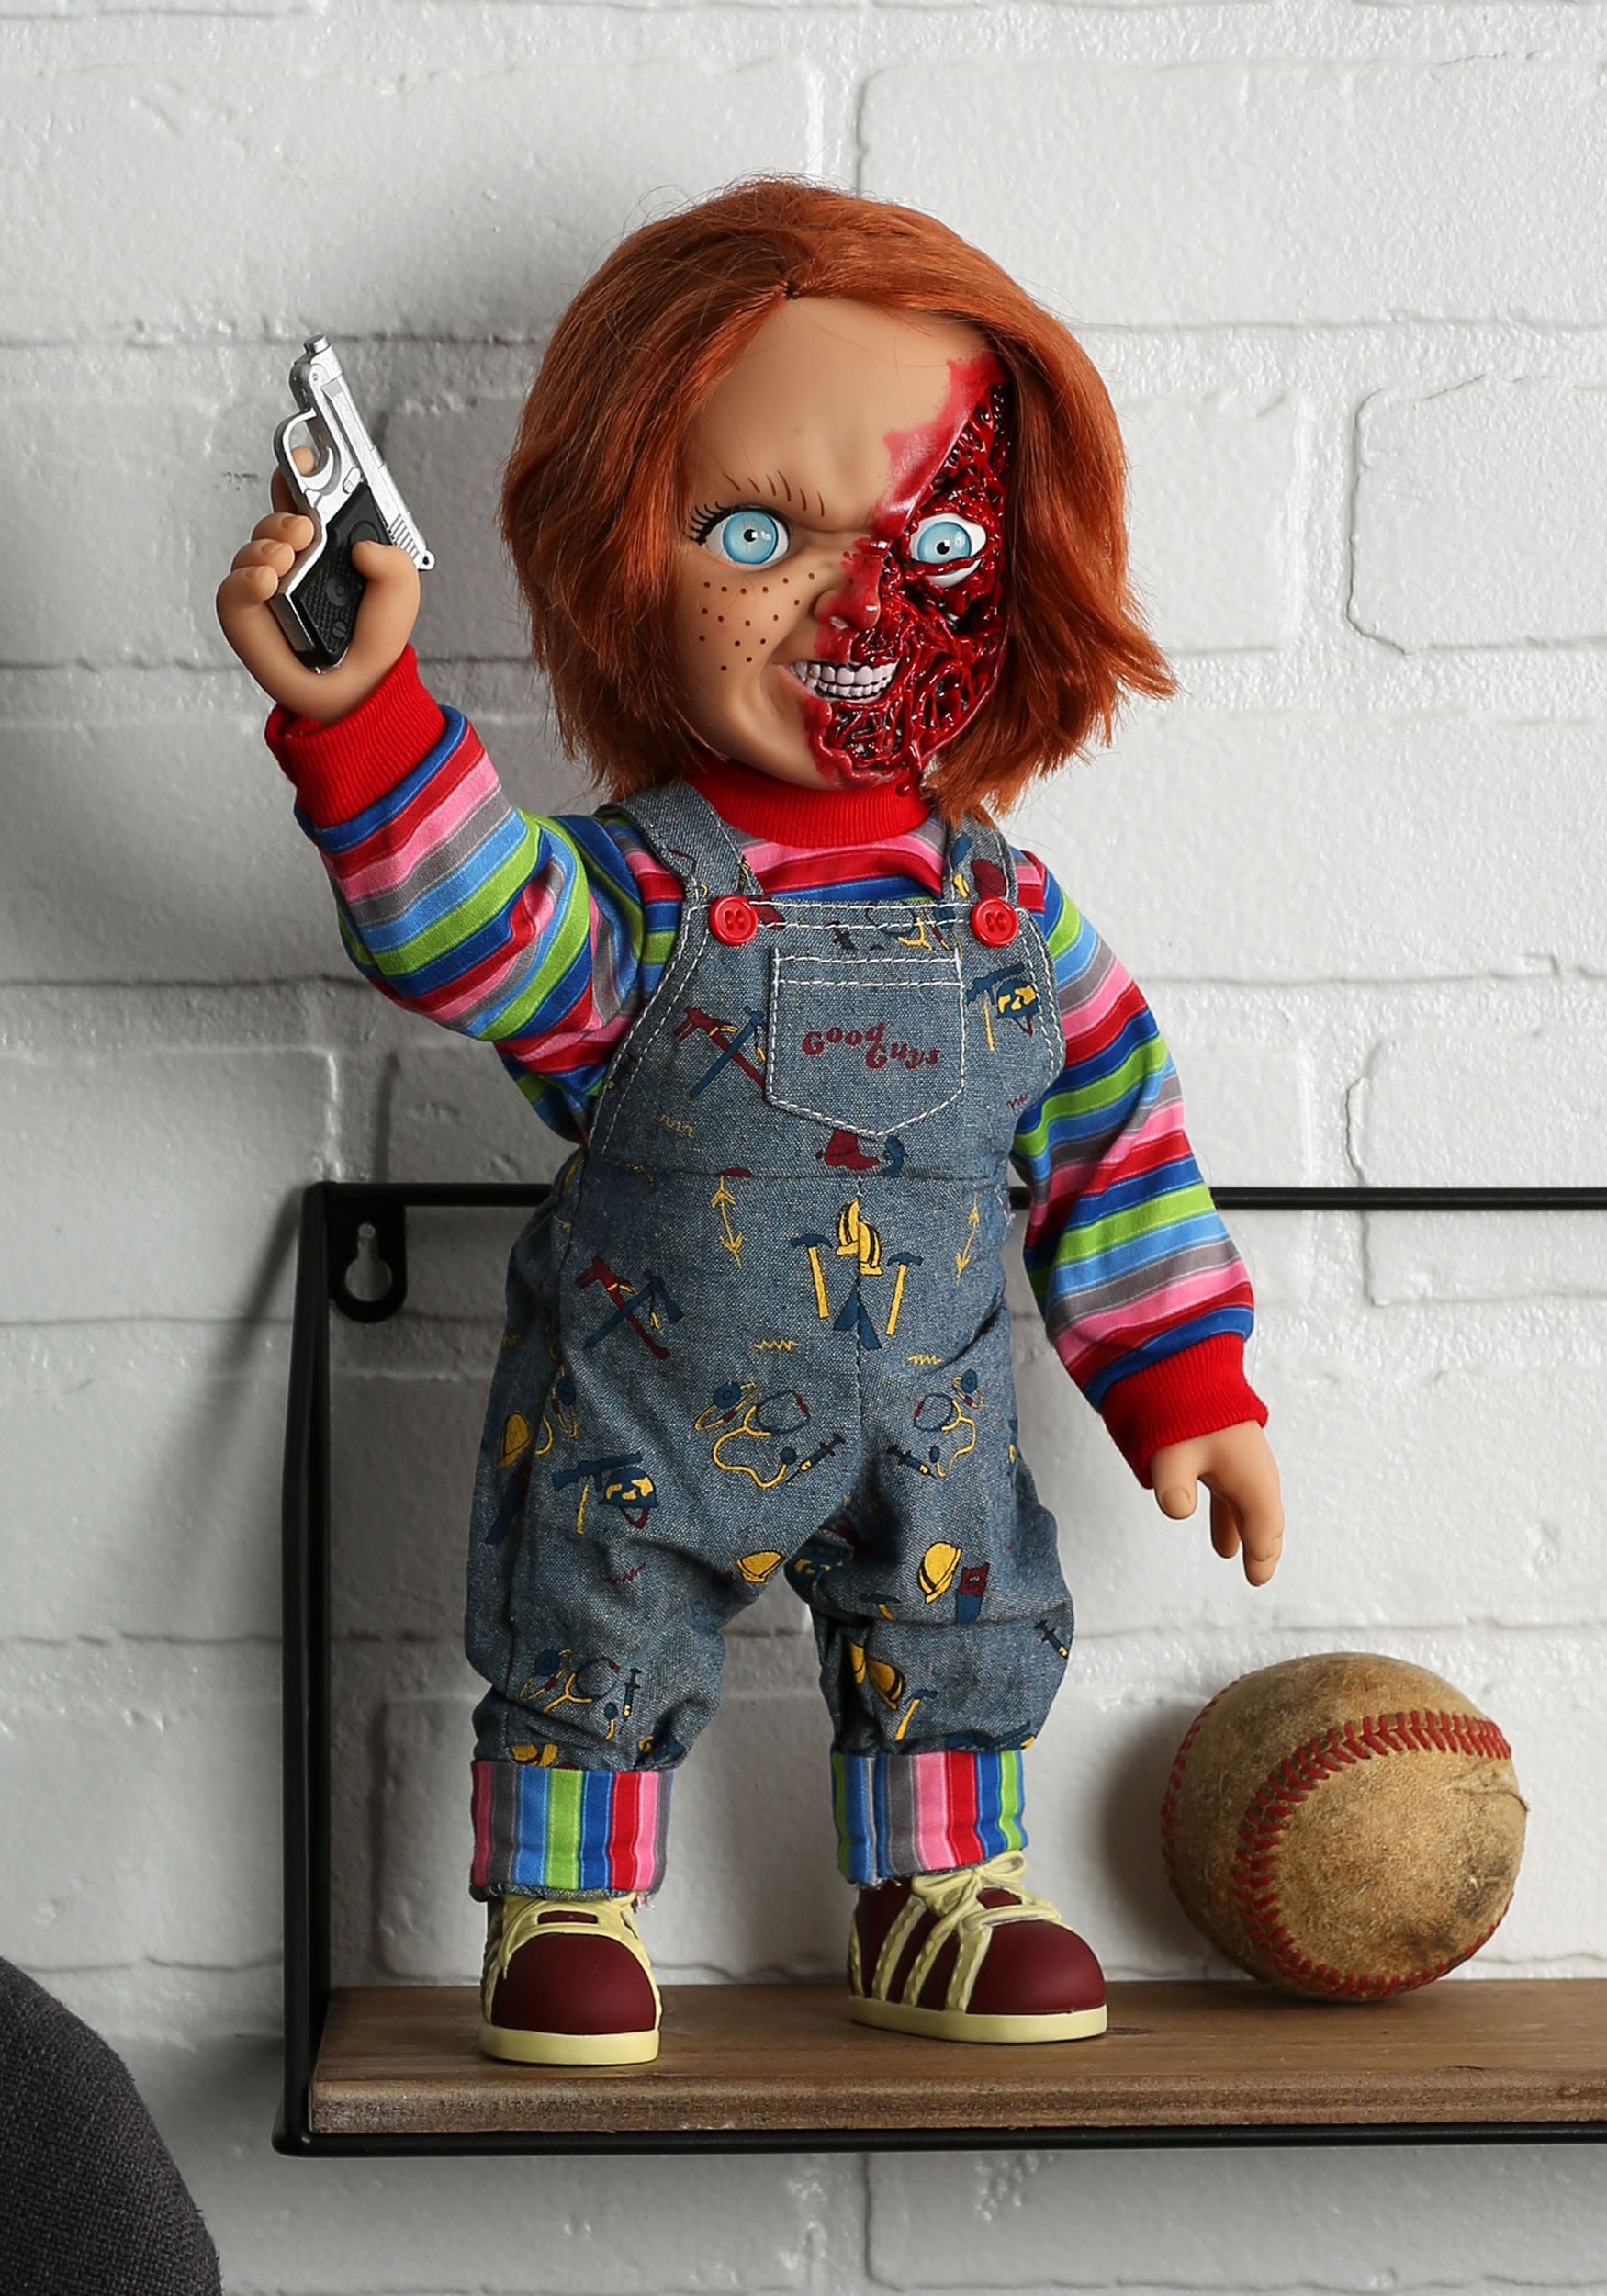 Child's Play 3: Pizza Face Chucky Talking Doll Version